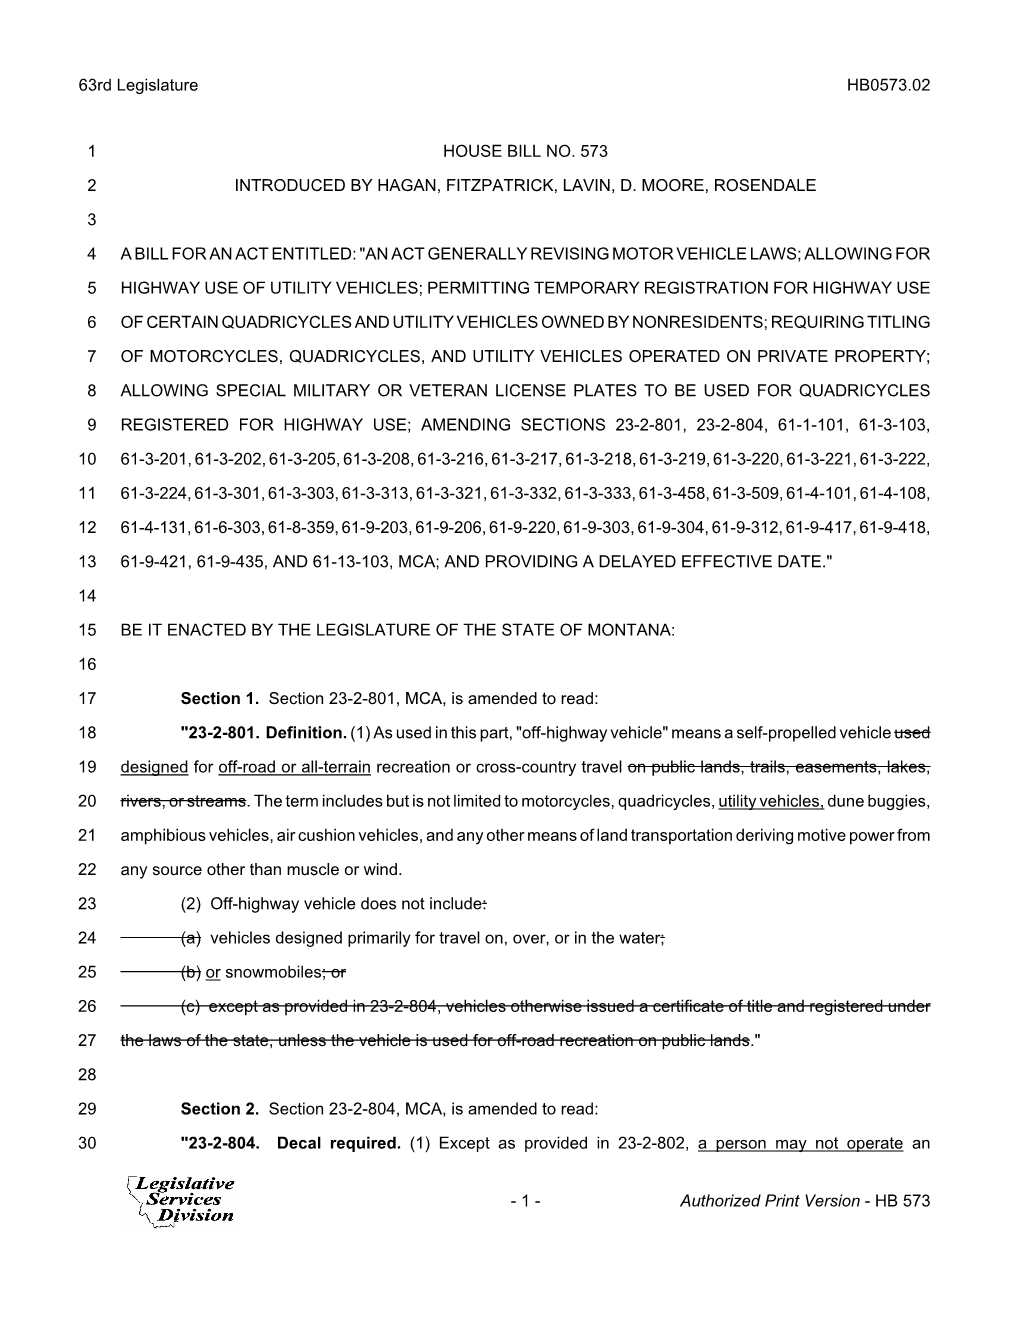 63Rd Legislature HB0573.02 HOUSE BILL NO. 573 1 INTRODUCED BY